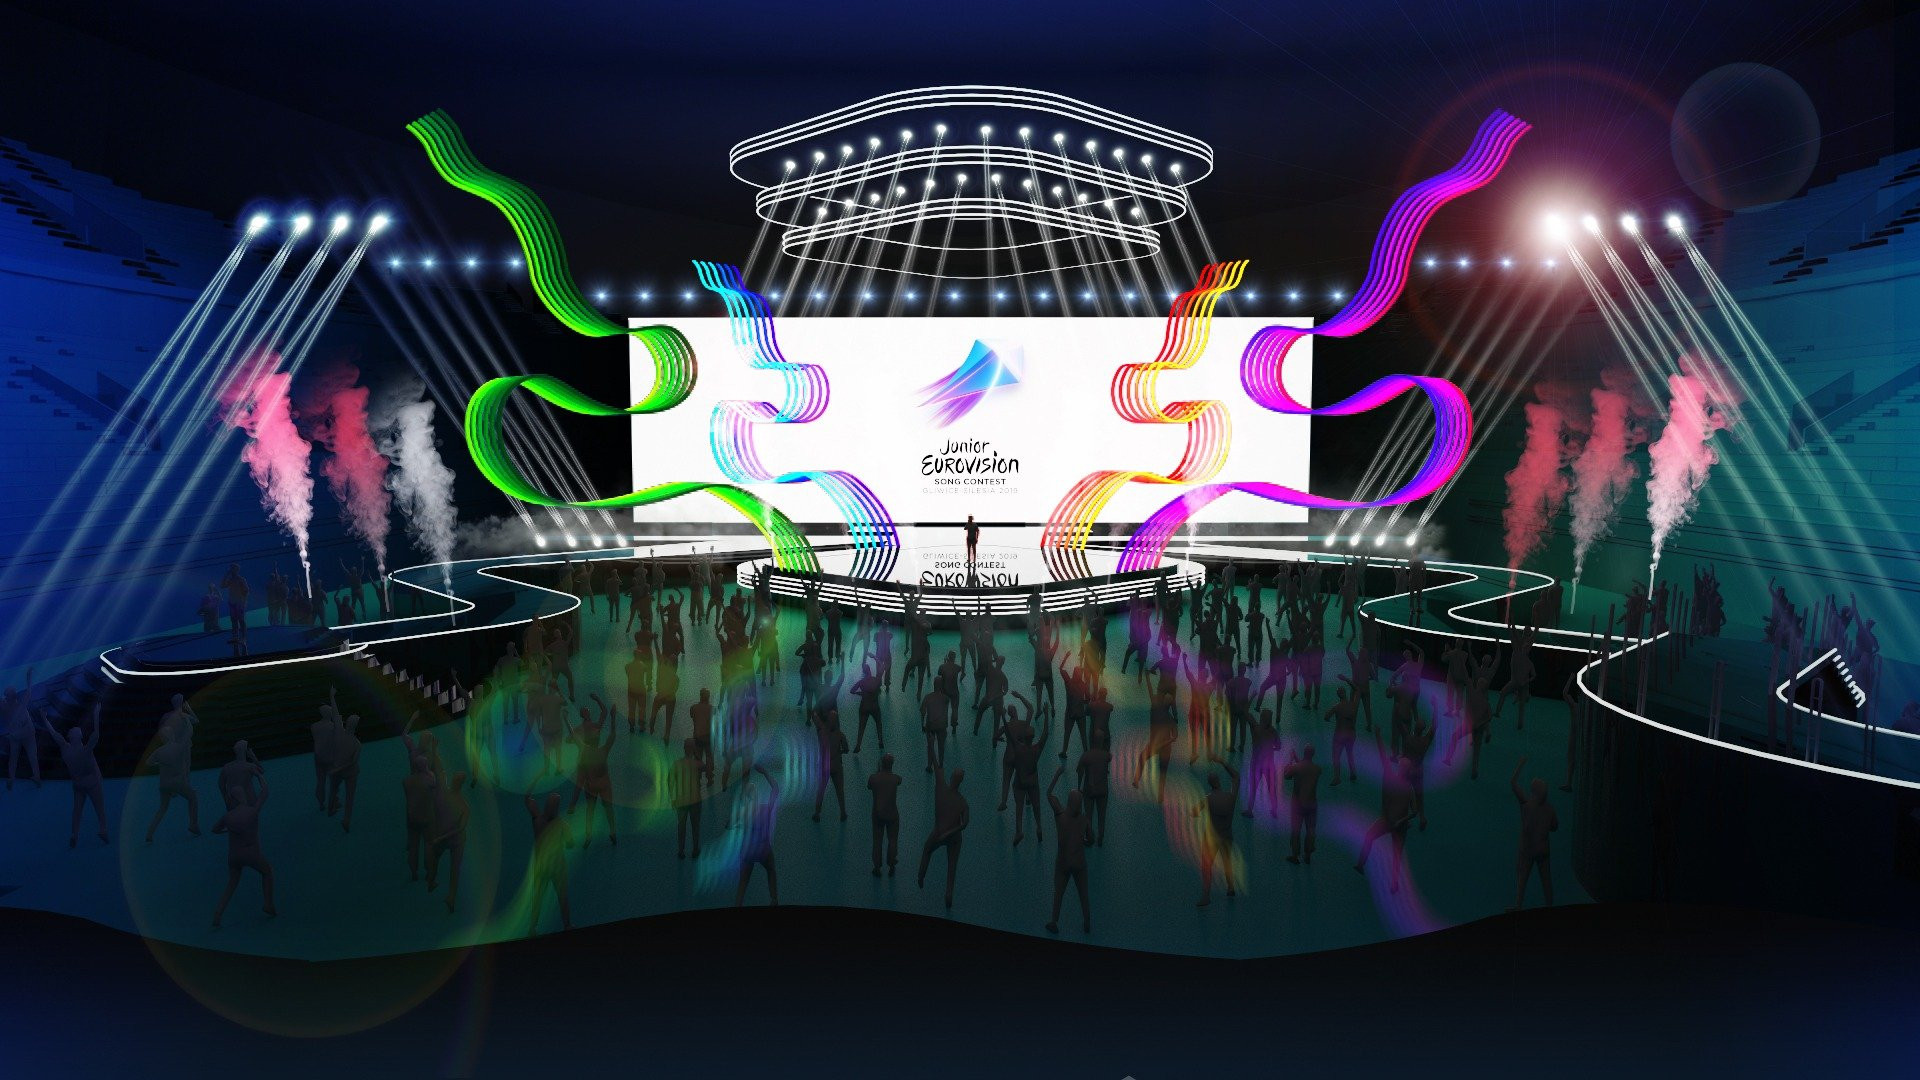 Junior Eurovision: The stage is ready – Check it out!